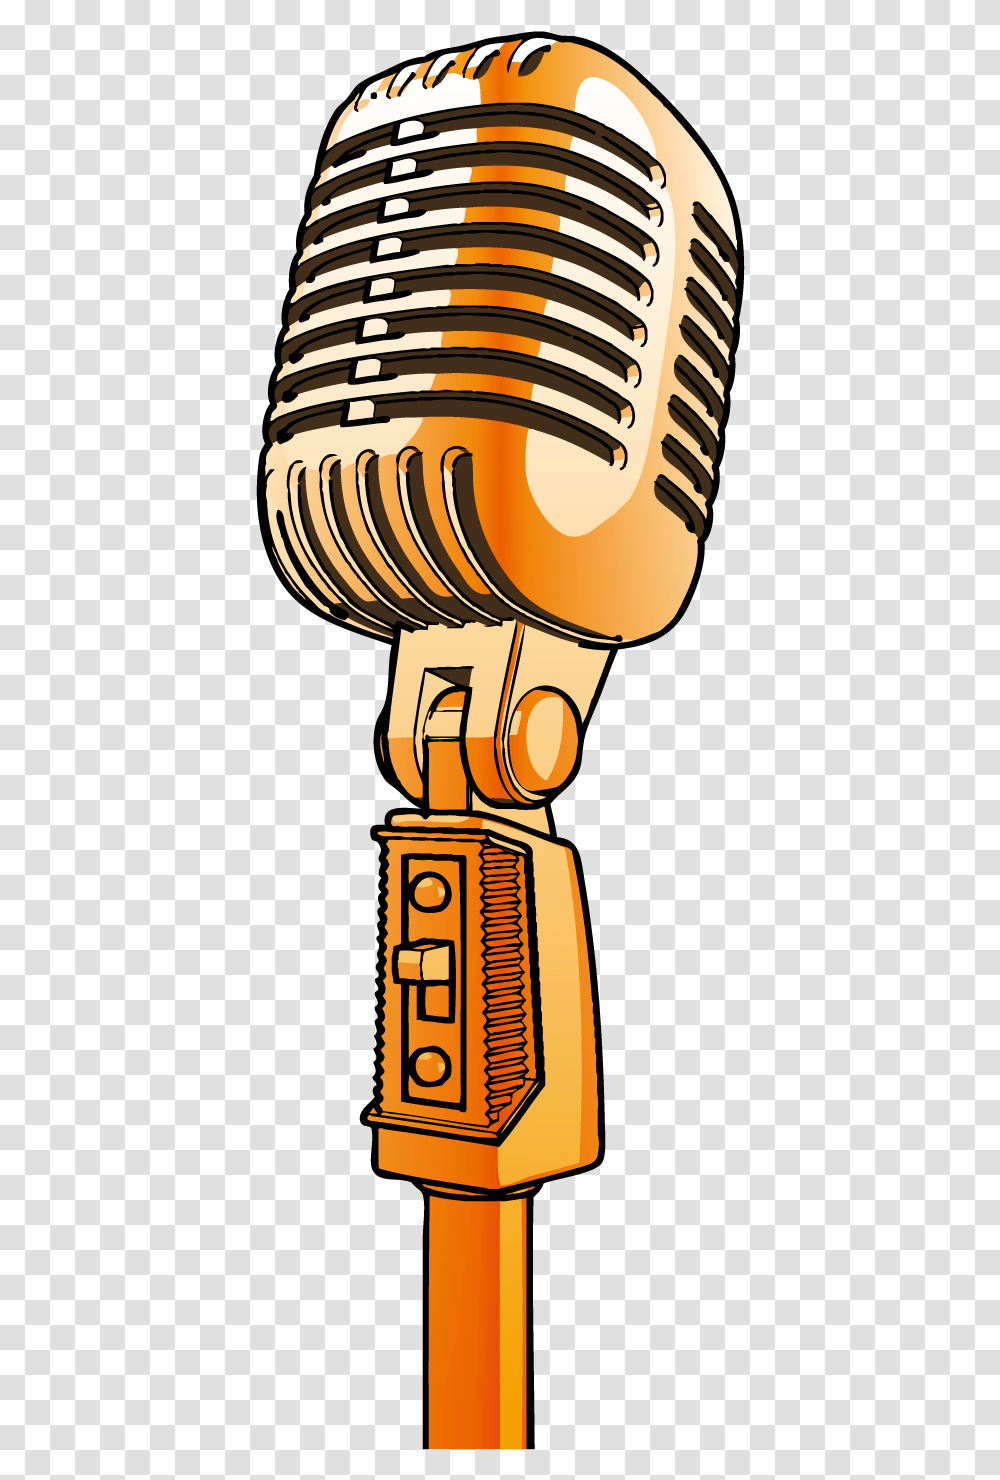 Gold Drawing Microphone Microphone Drawing, Trophy, Fire Hydrant, Musical Instrument Transparent Png